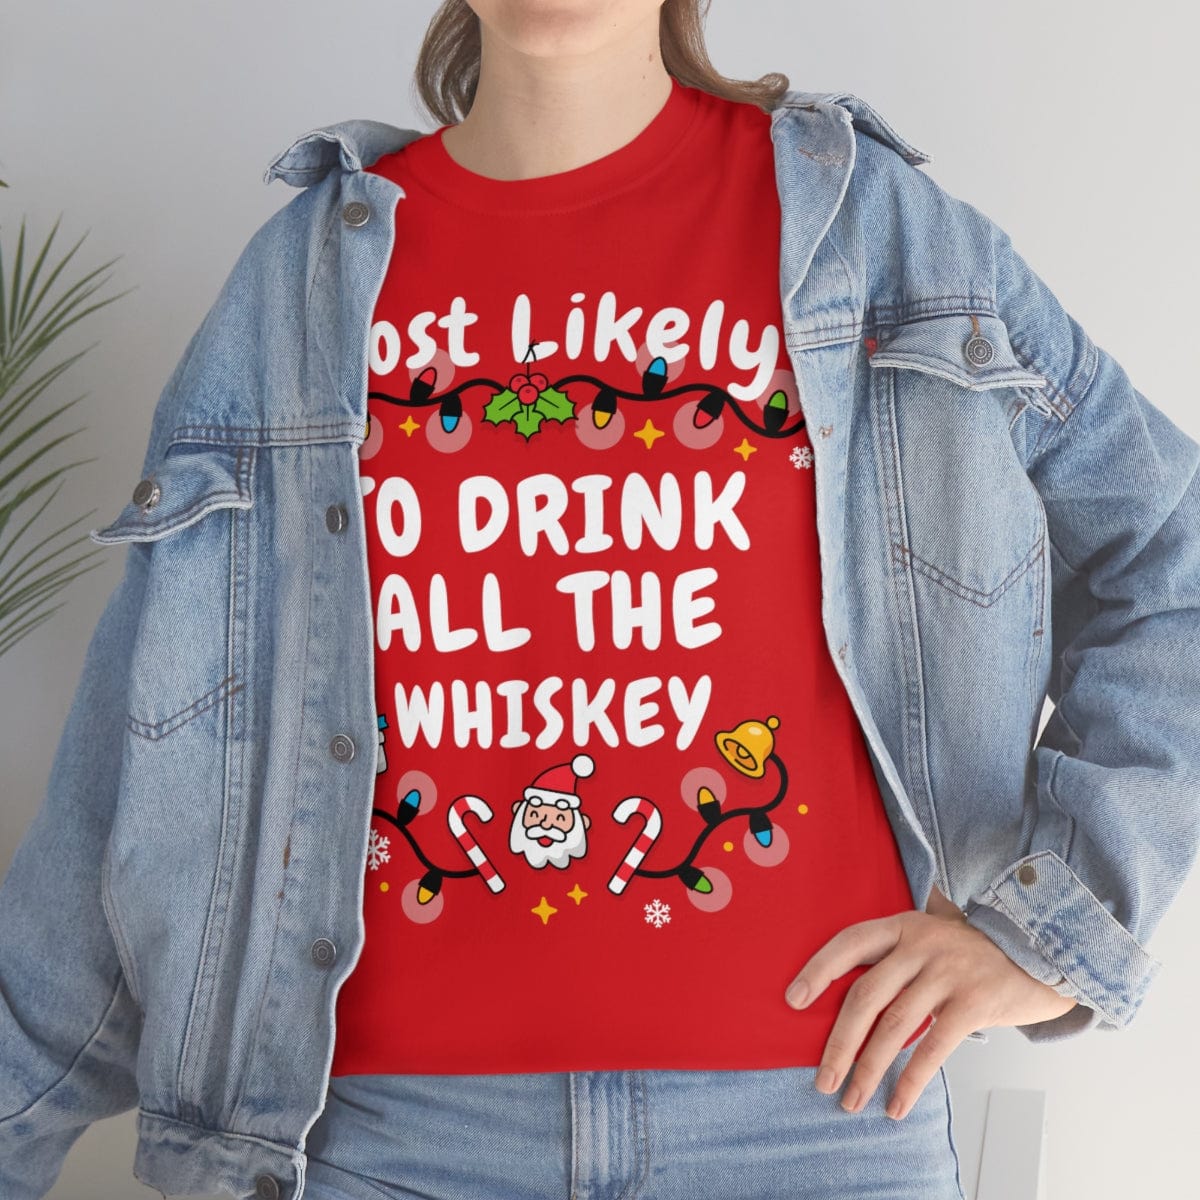 TO DRINK ALL THE WHISKEY